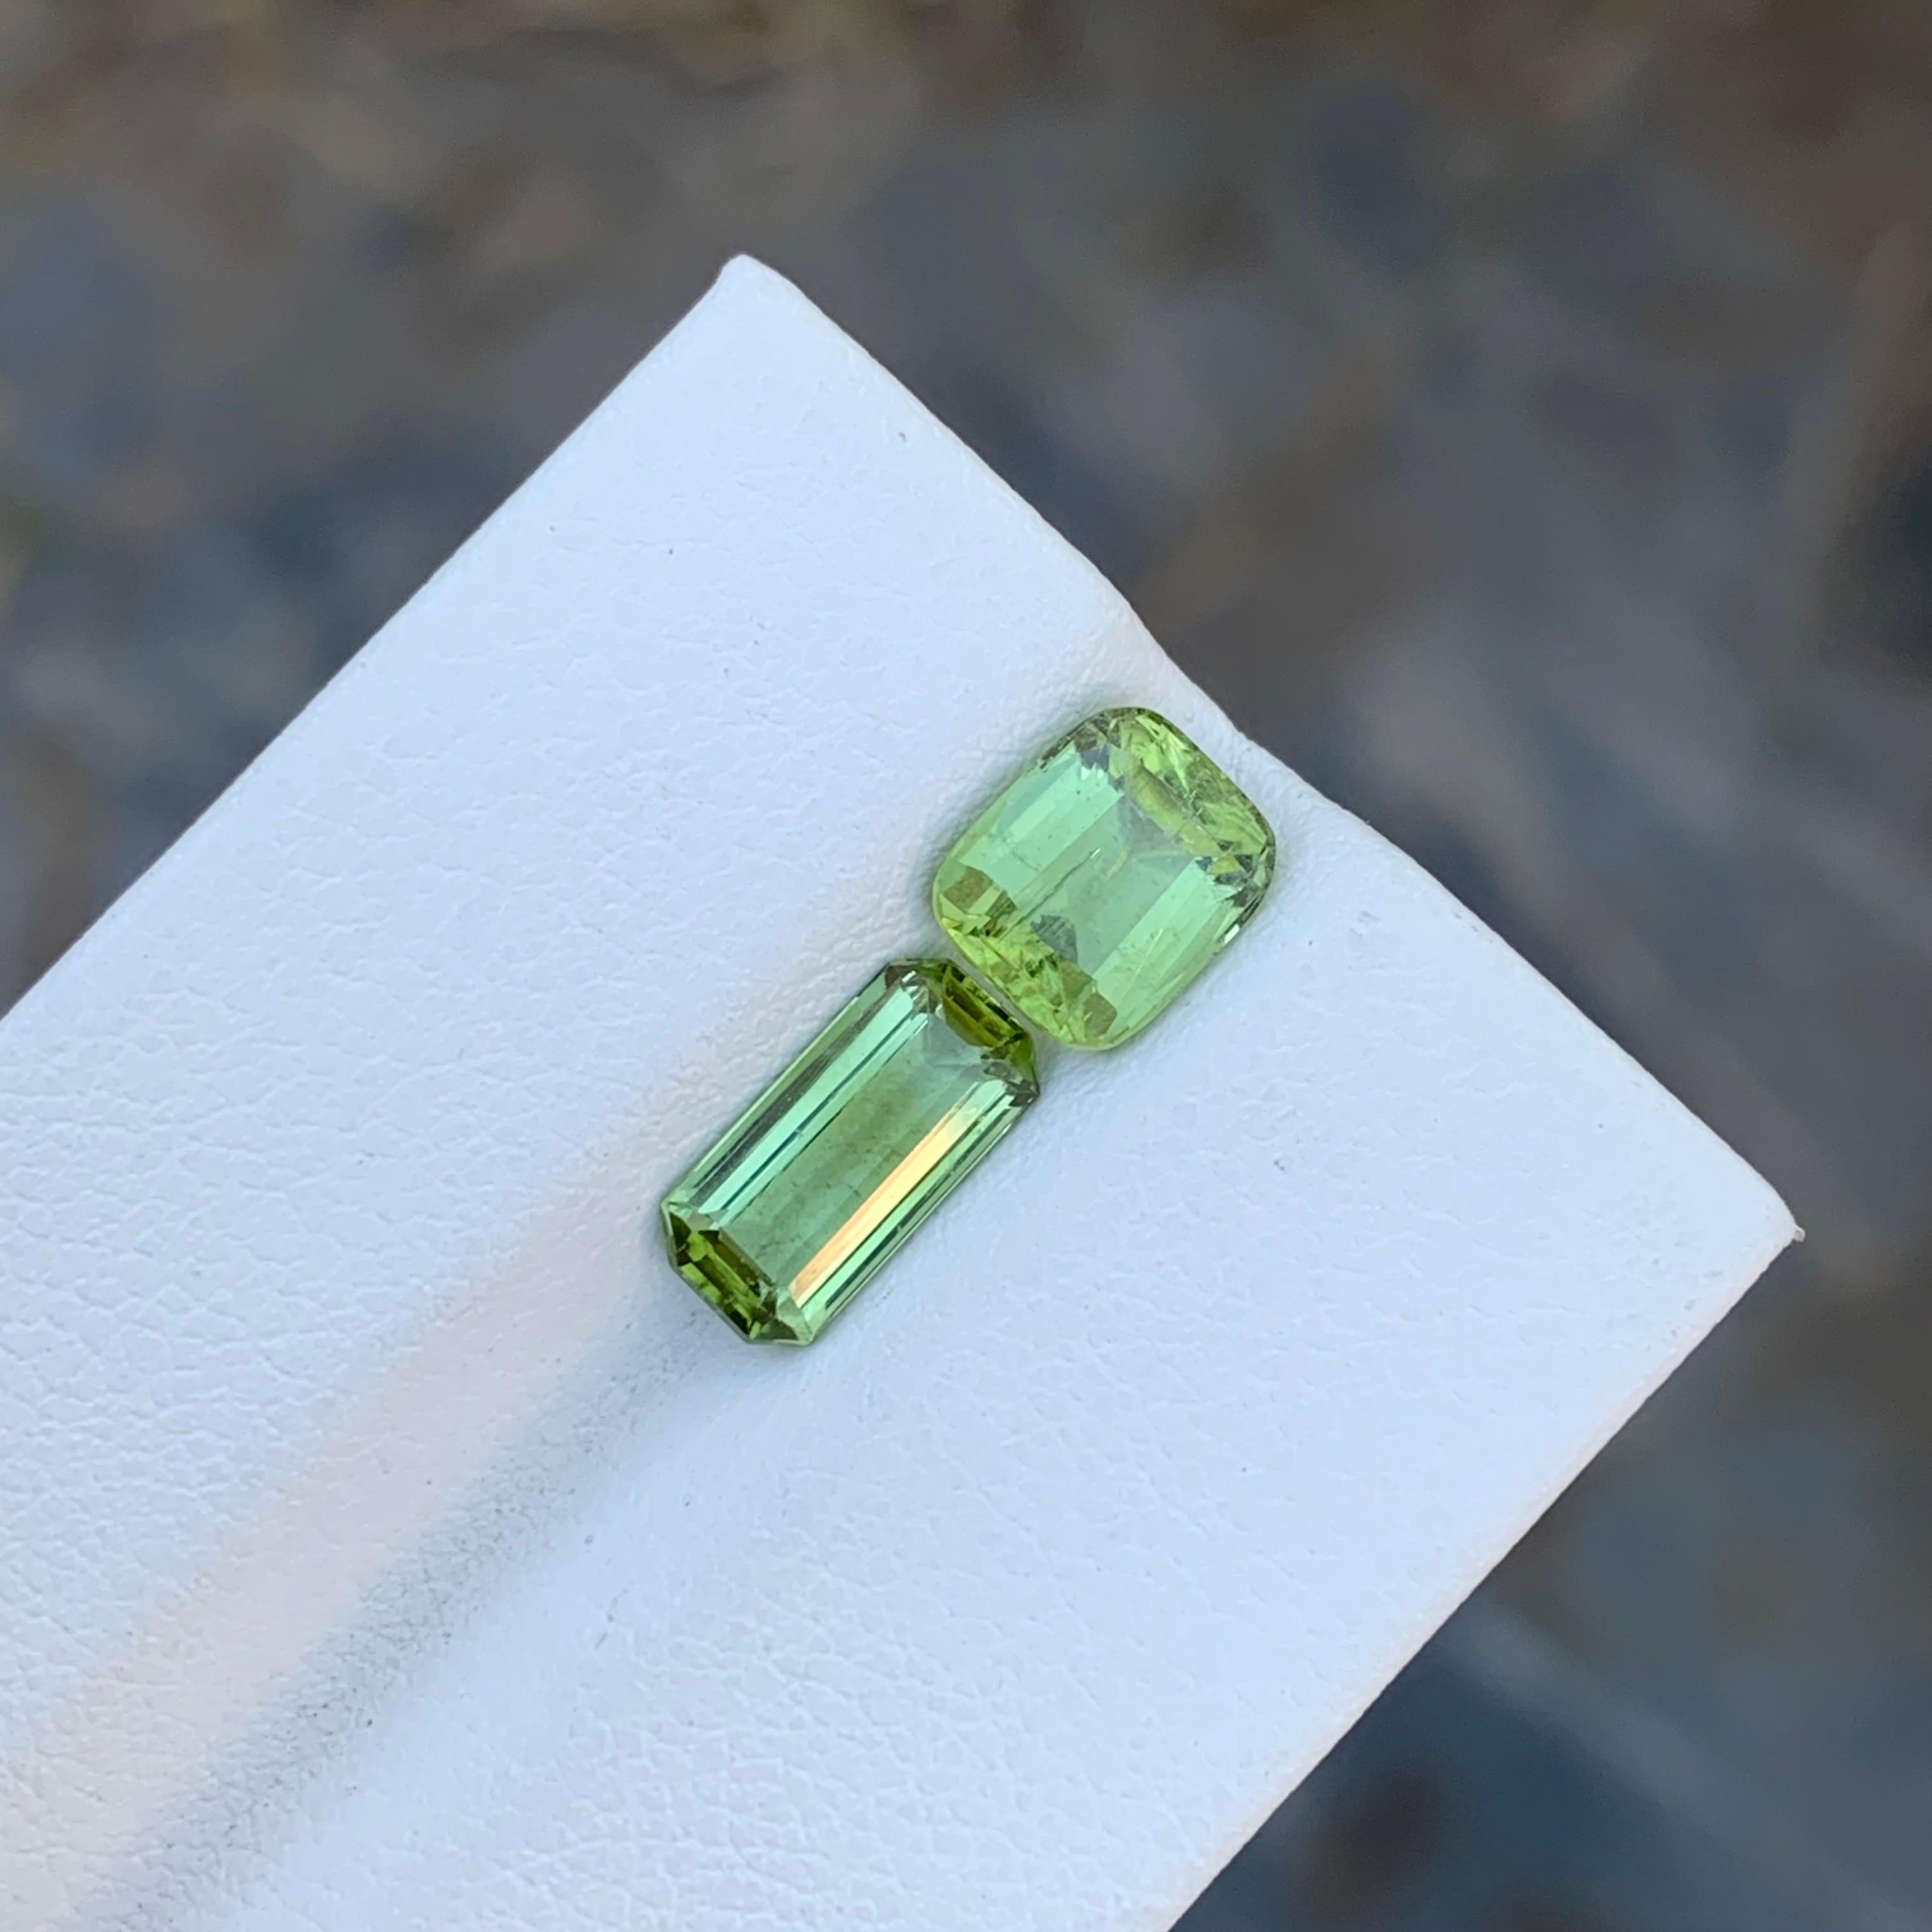 Cushion Cut 3 Carats Natural Loose Green Tourmaline Pieces For Jewellery Making  For Sale